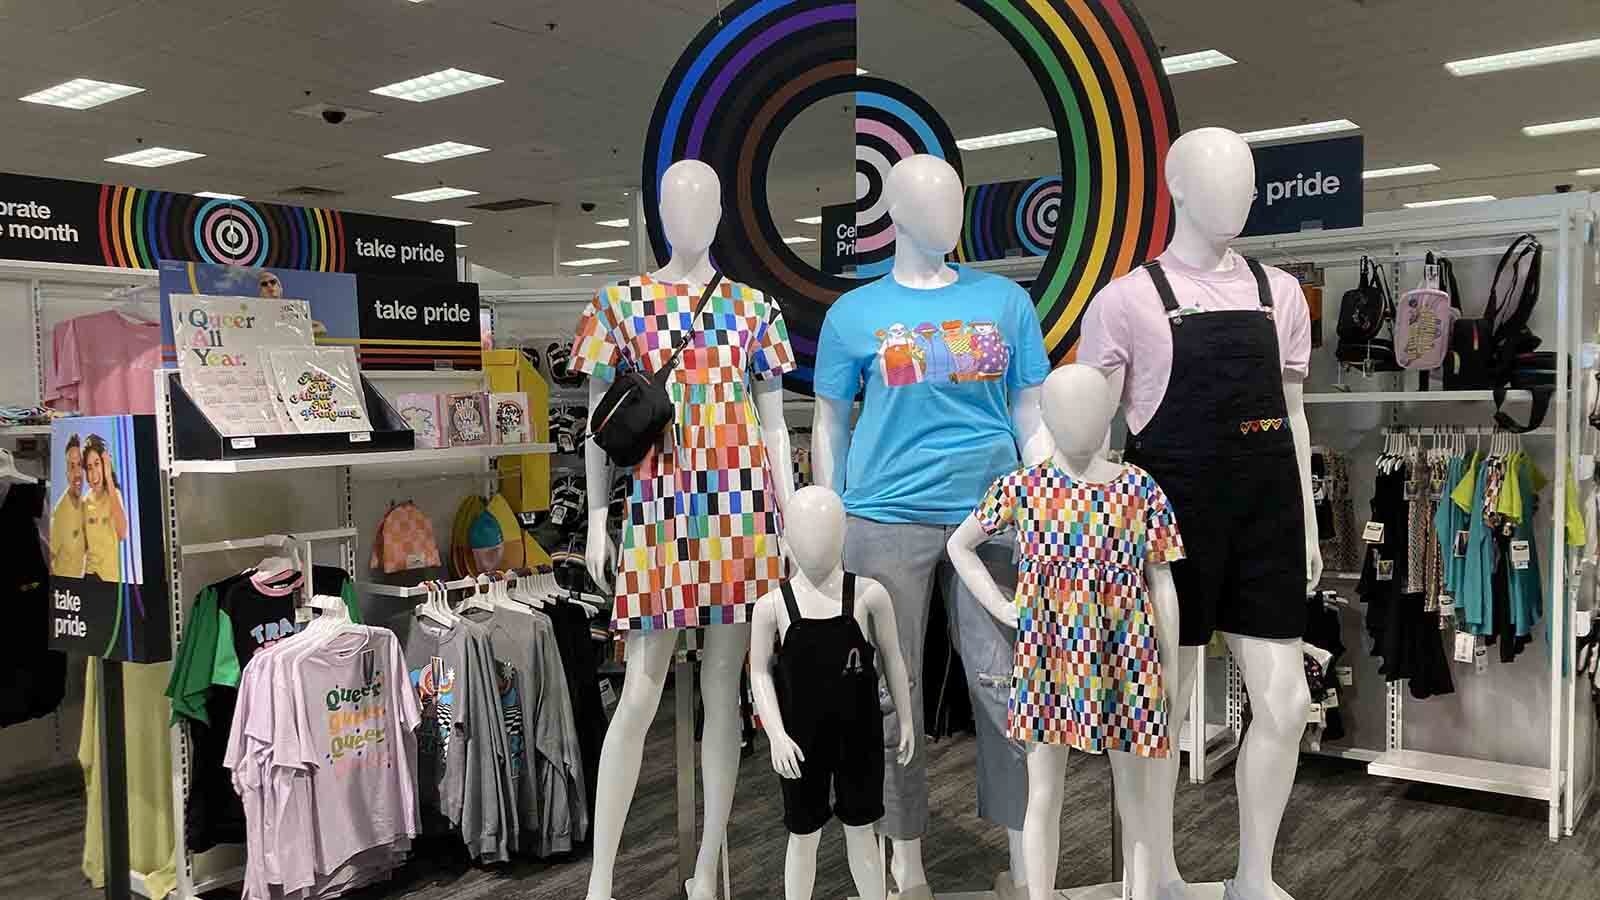 Casper Target Moves Its LGBTQ Pride Collection To The Back Of The Store ...